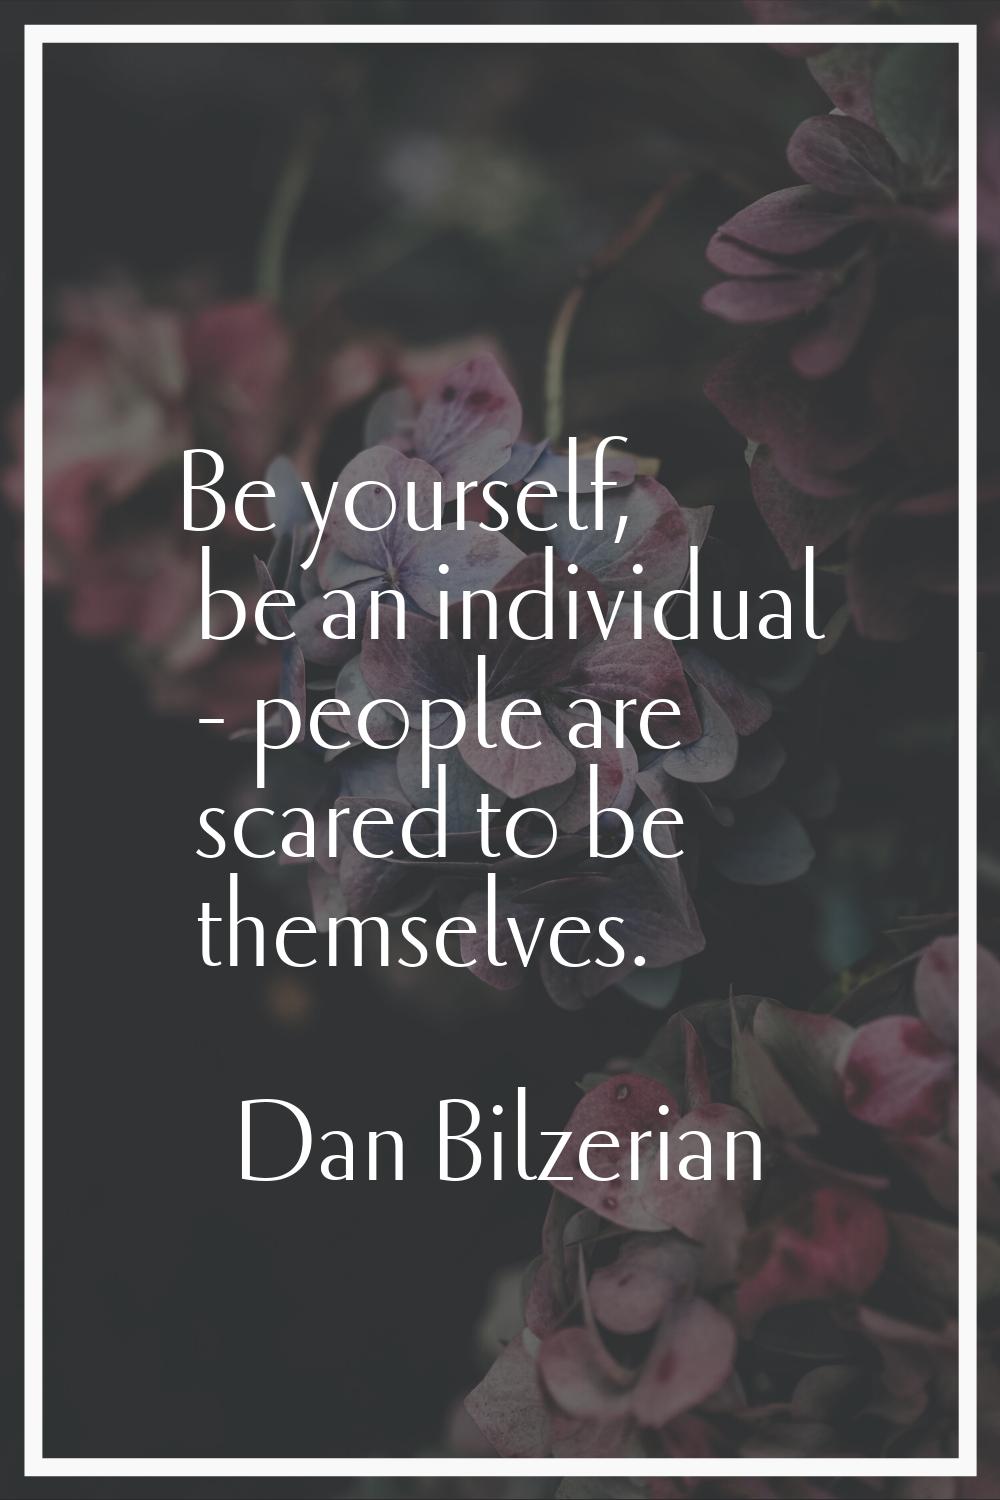 Be yourself, be an individual - people are scared to be themselves.